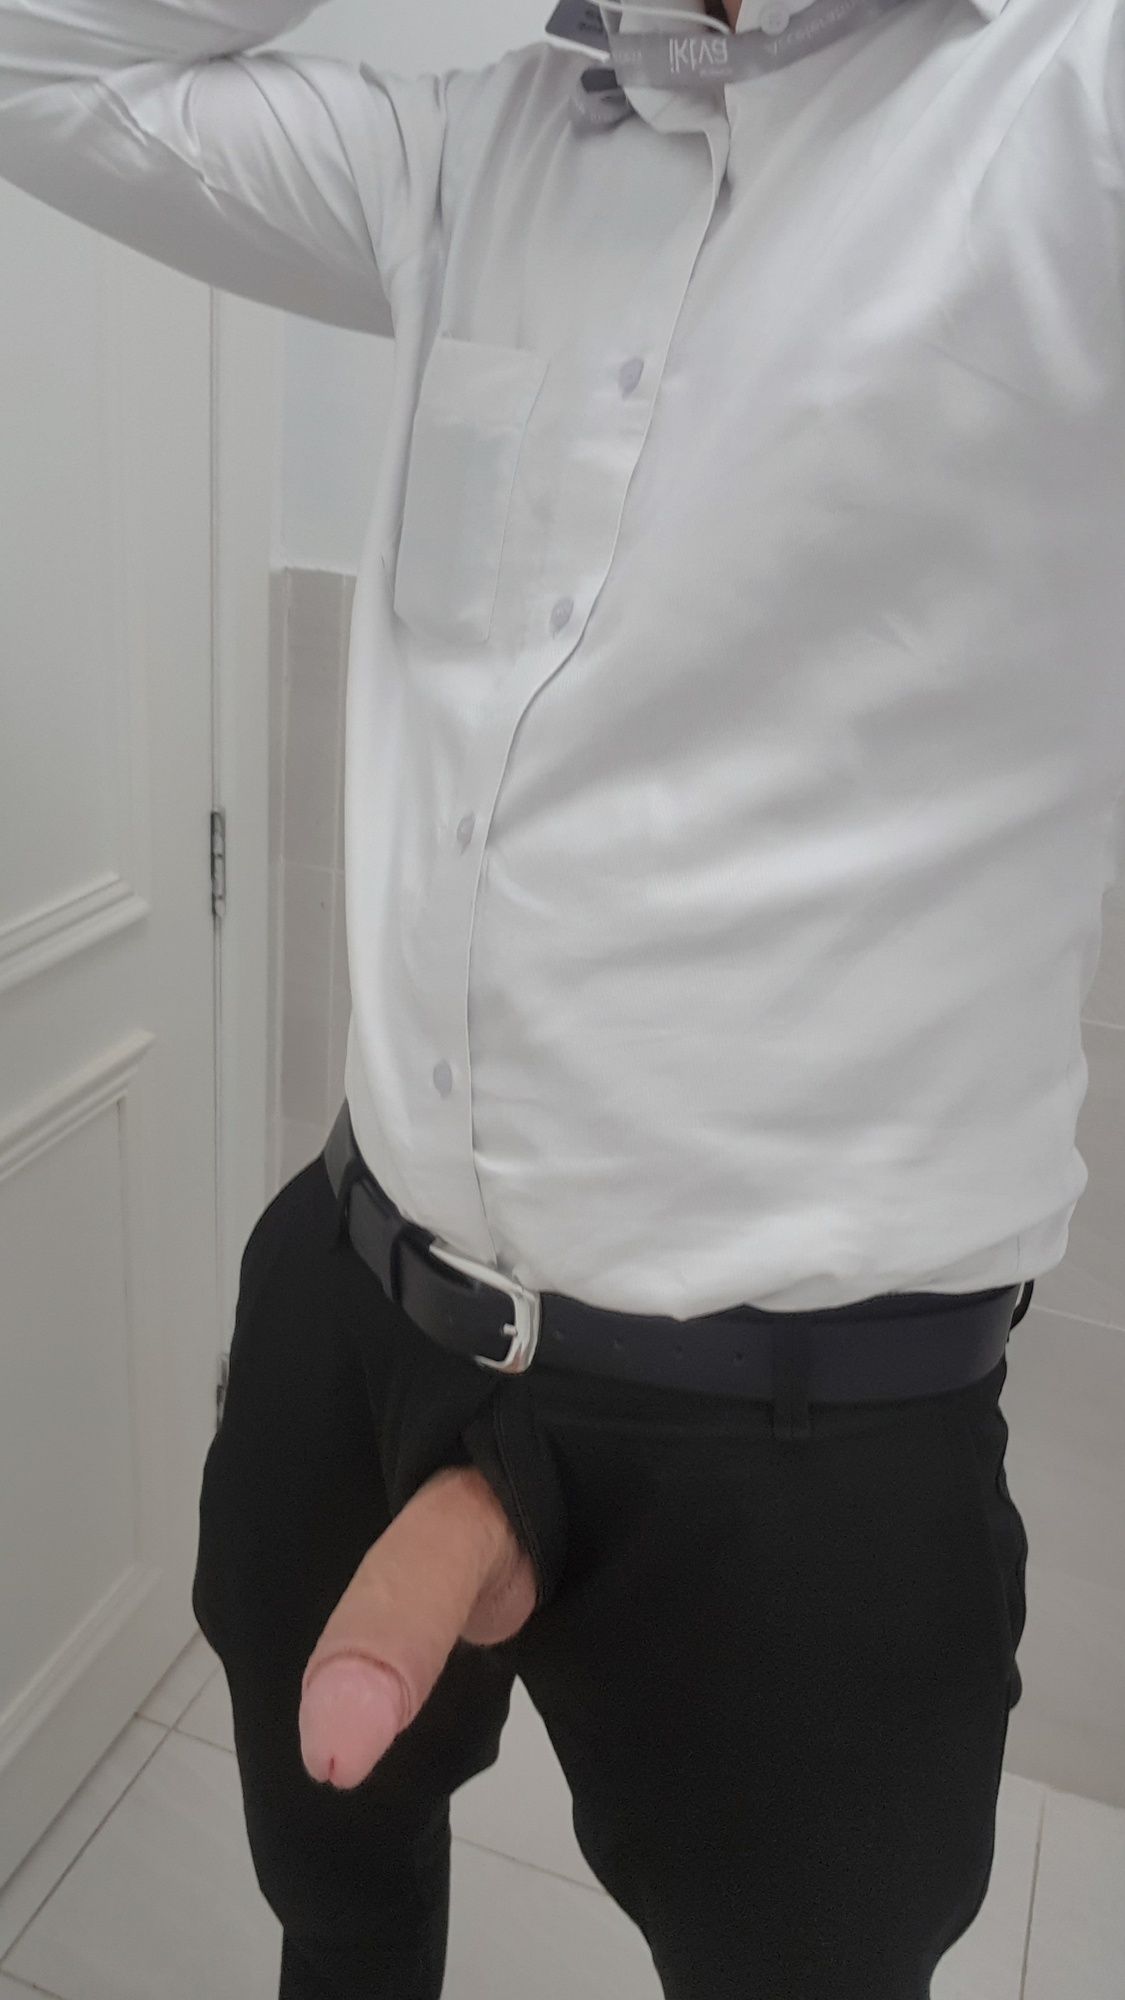 Had to let my cock out to breathe in the office toilet #4